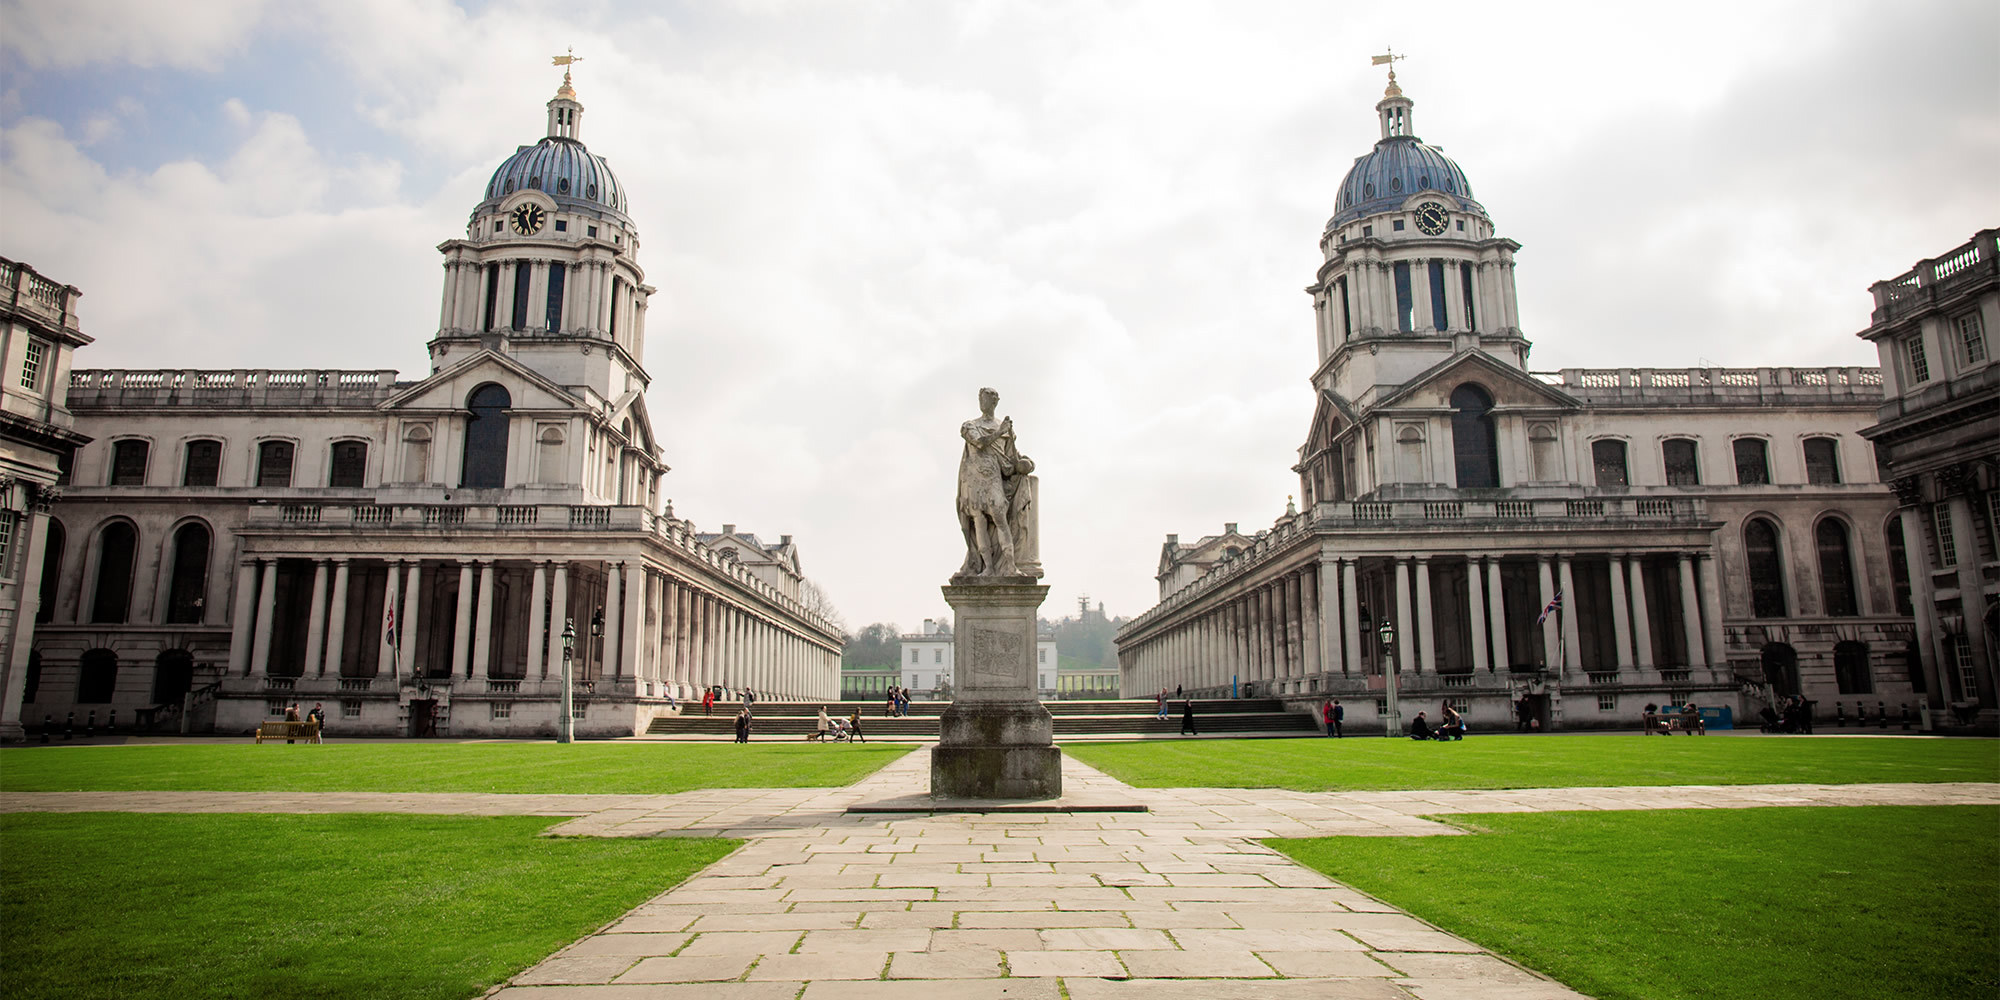 About the Greenwich Campus About the university University of Greenwich